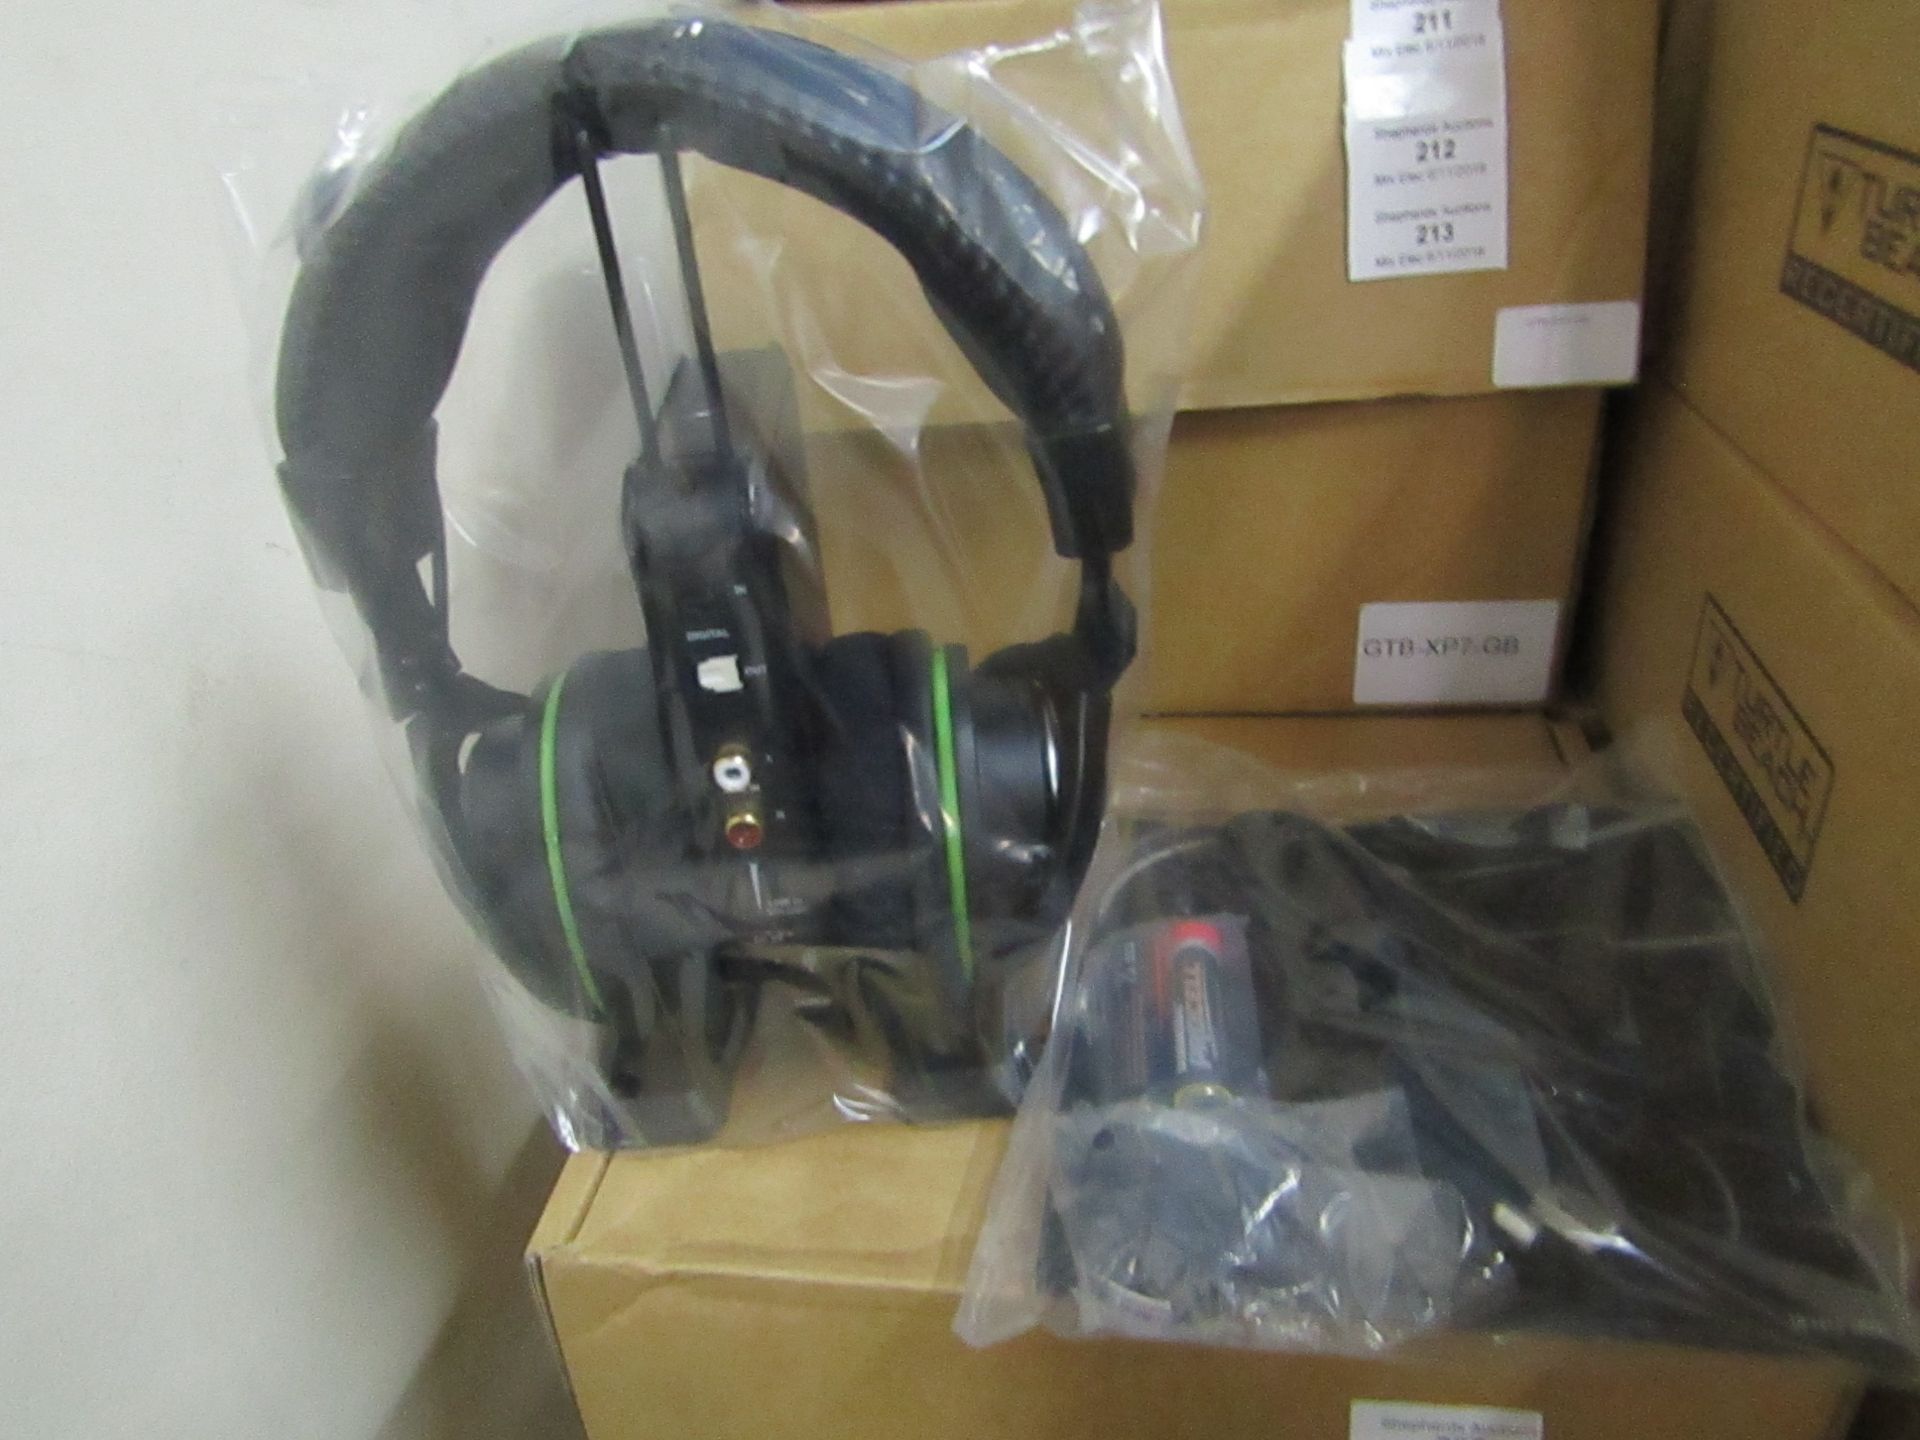 Turtle Beach XP500 Gaming headset for docking AMP, brand new